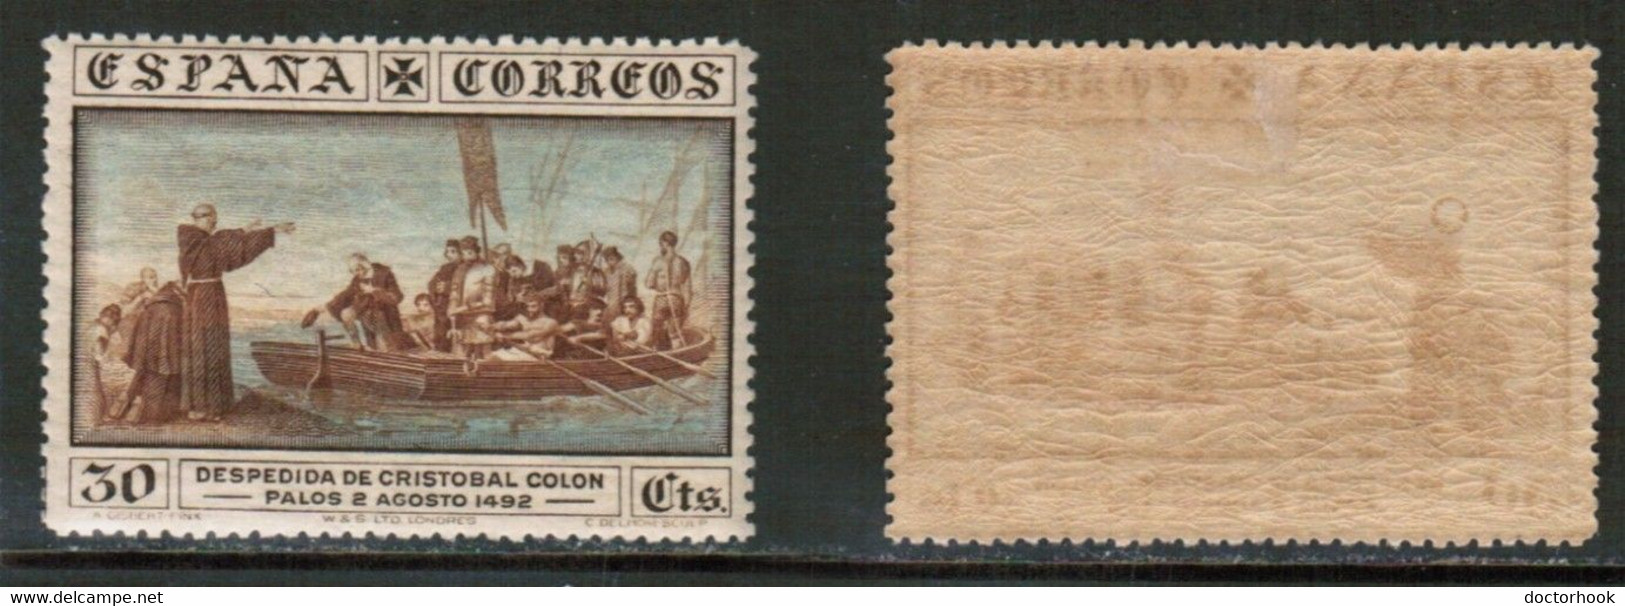 SPAIN   Scott # 427* MINT LH (CONDITION AS PER SCAN) (WW-2-55) - Unused Stamps